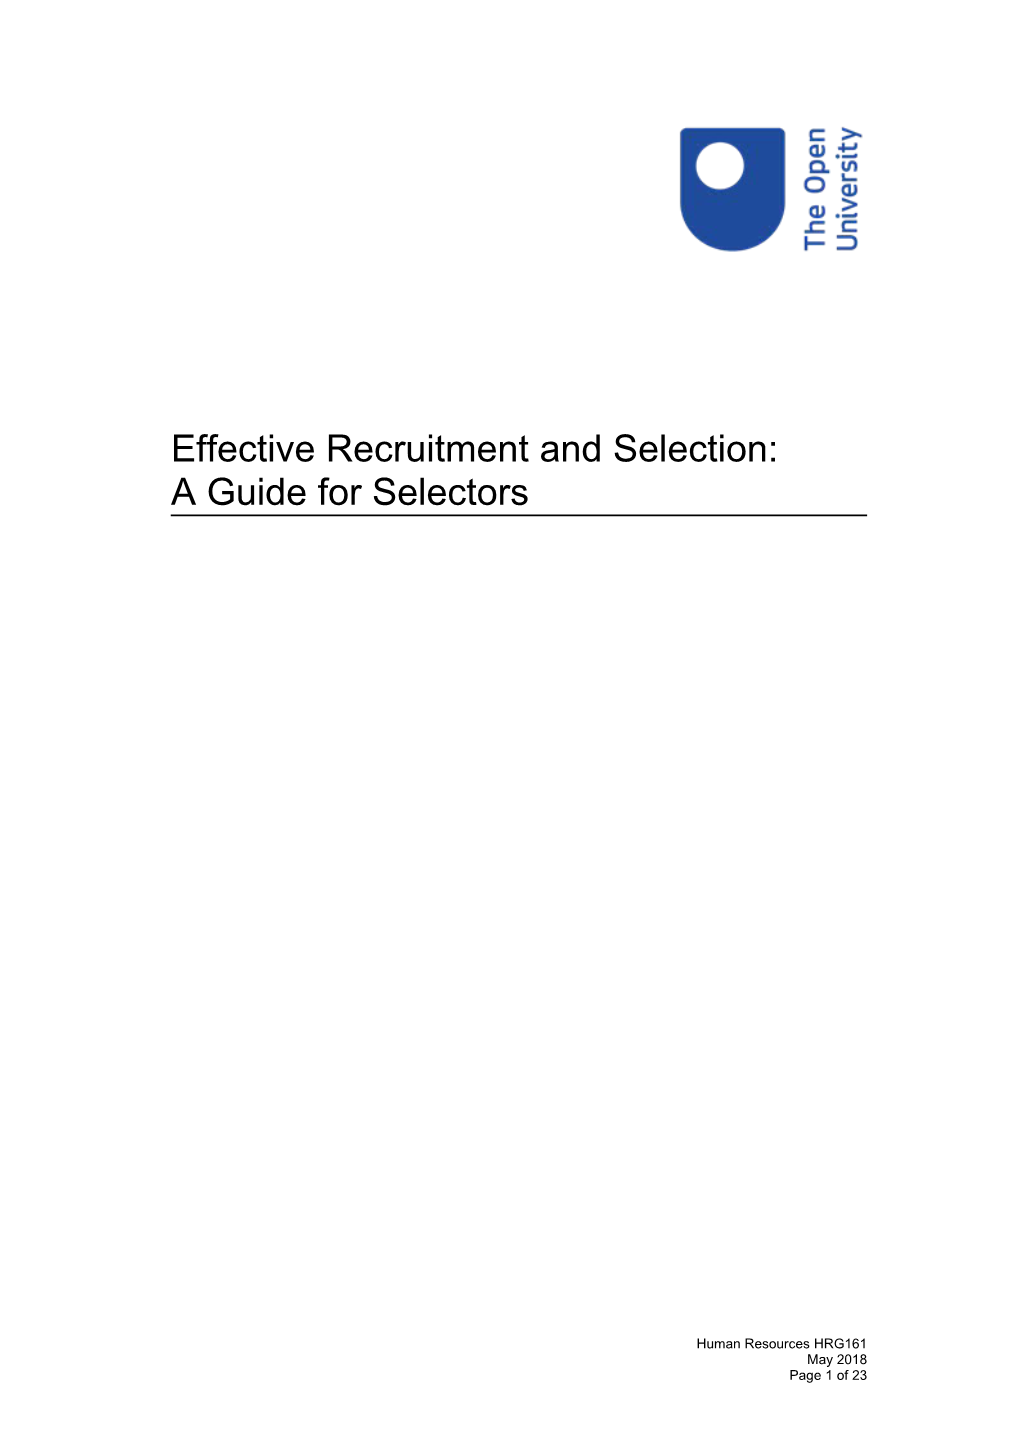 Effective Recruitment and Selection, a Guide for Selectors HRG161